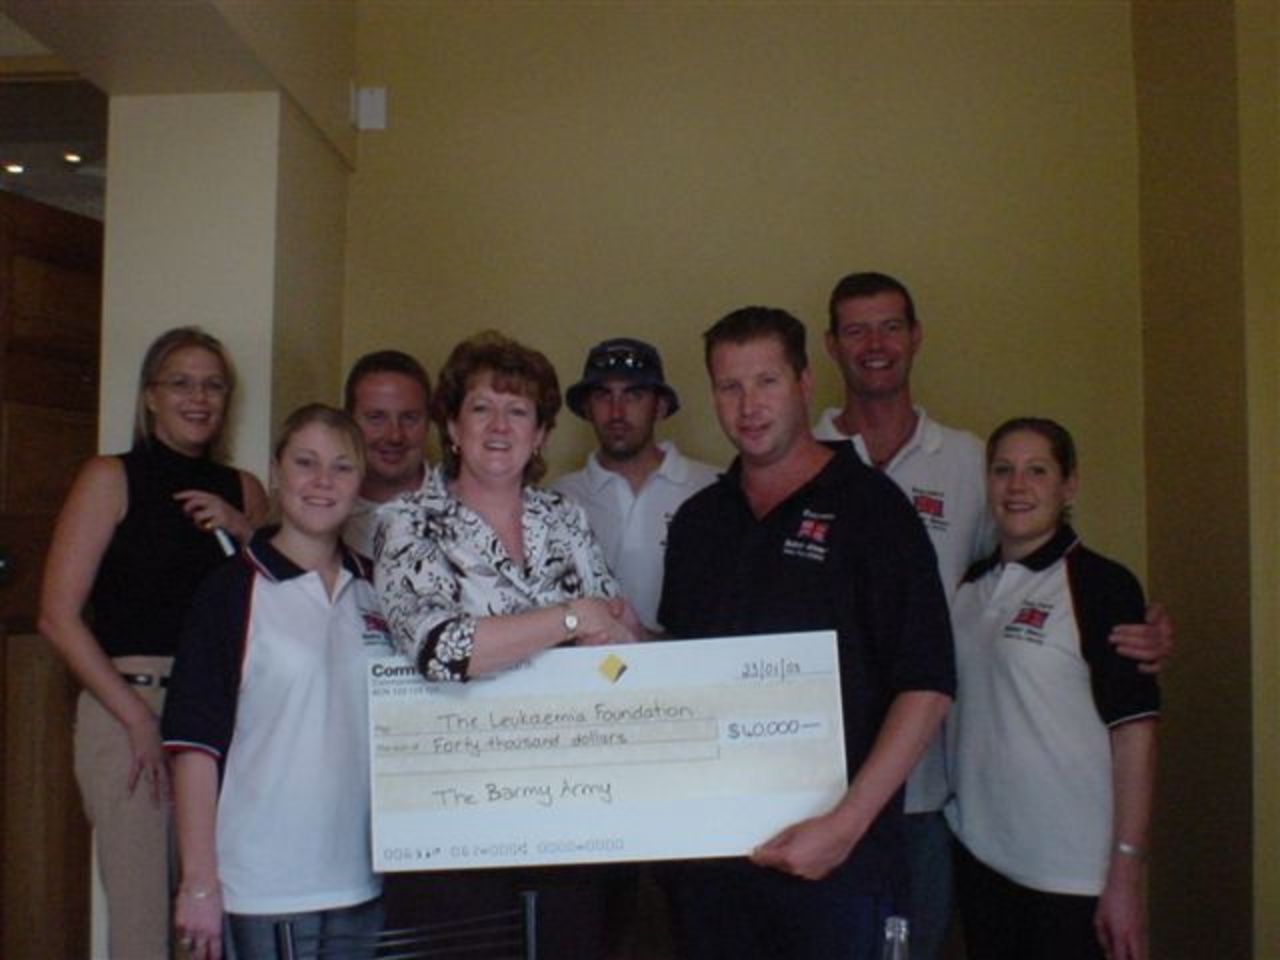 Paul 'leafy' Burnham and members of the Barmy Army present a cheque for USD40 000 to the Leukaemia Foundation, raised during the Ashes tour 2002-2003.